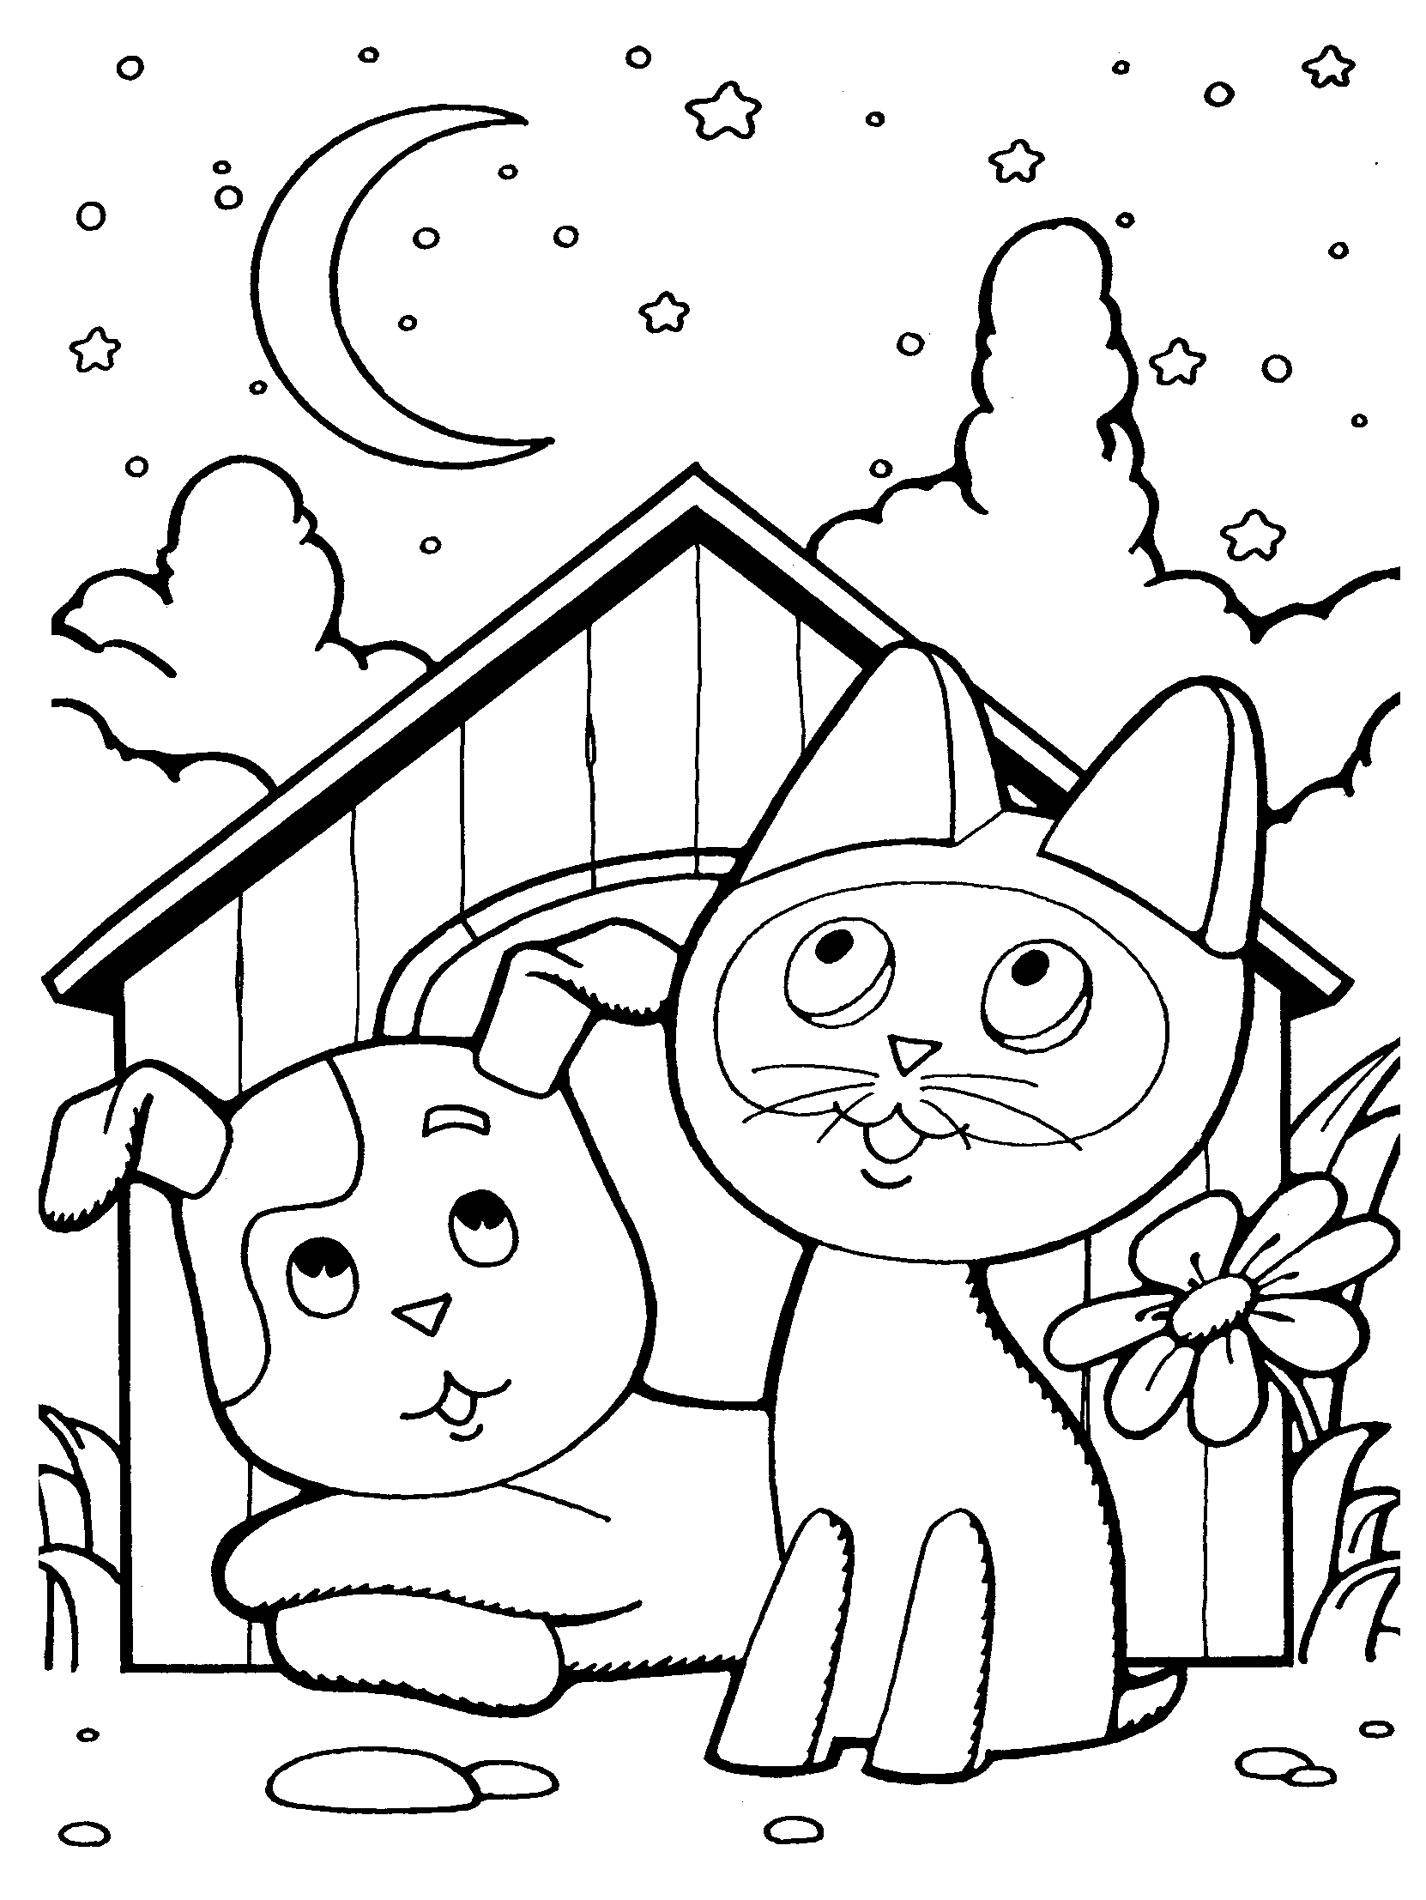 Coloring Drawing dogs and cats woof-woof in the night. Category Pets allowed. Tags:  cat, cat.